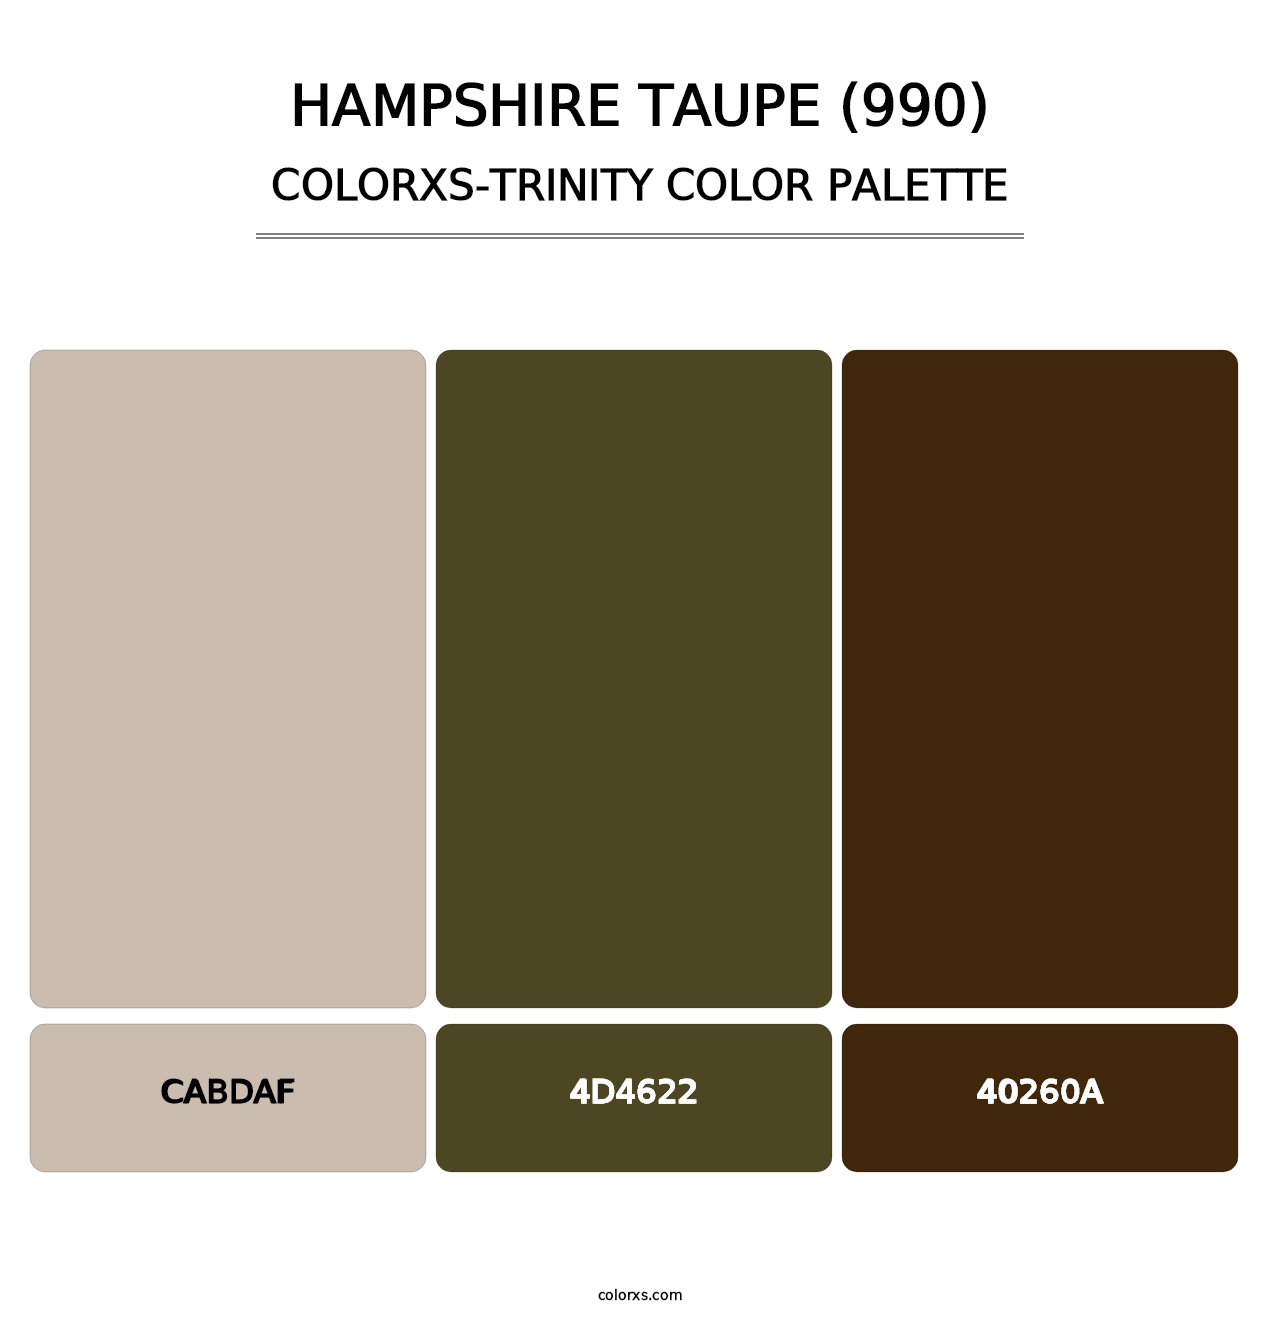 Hampshire Taupe (990) - Colorxs Trinity Palette